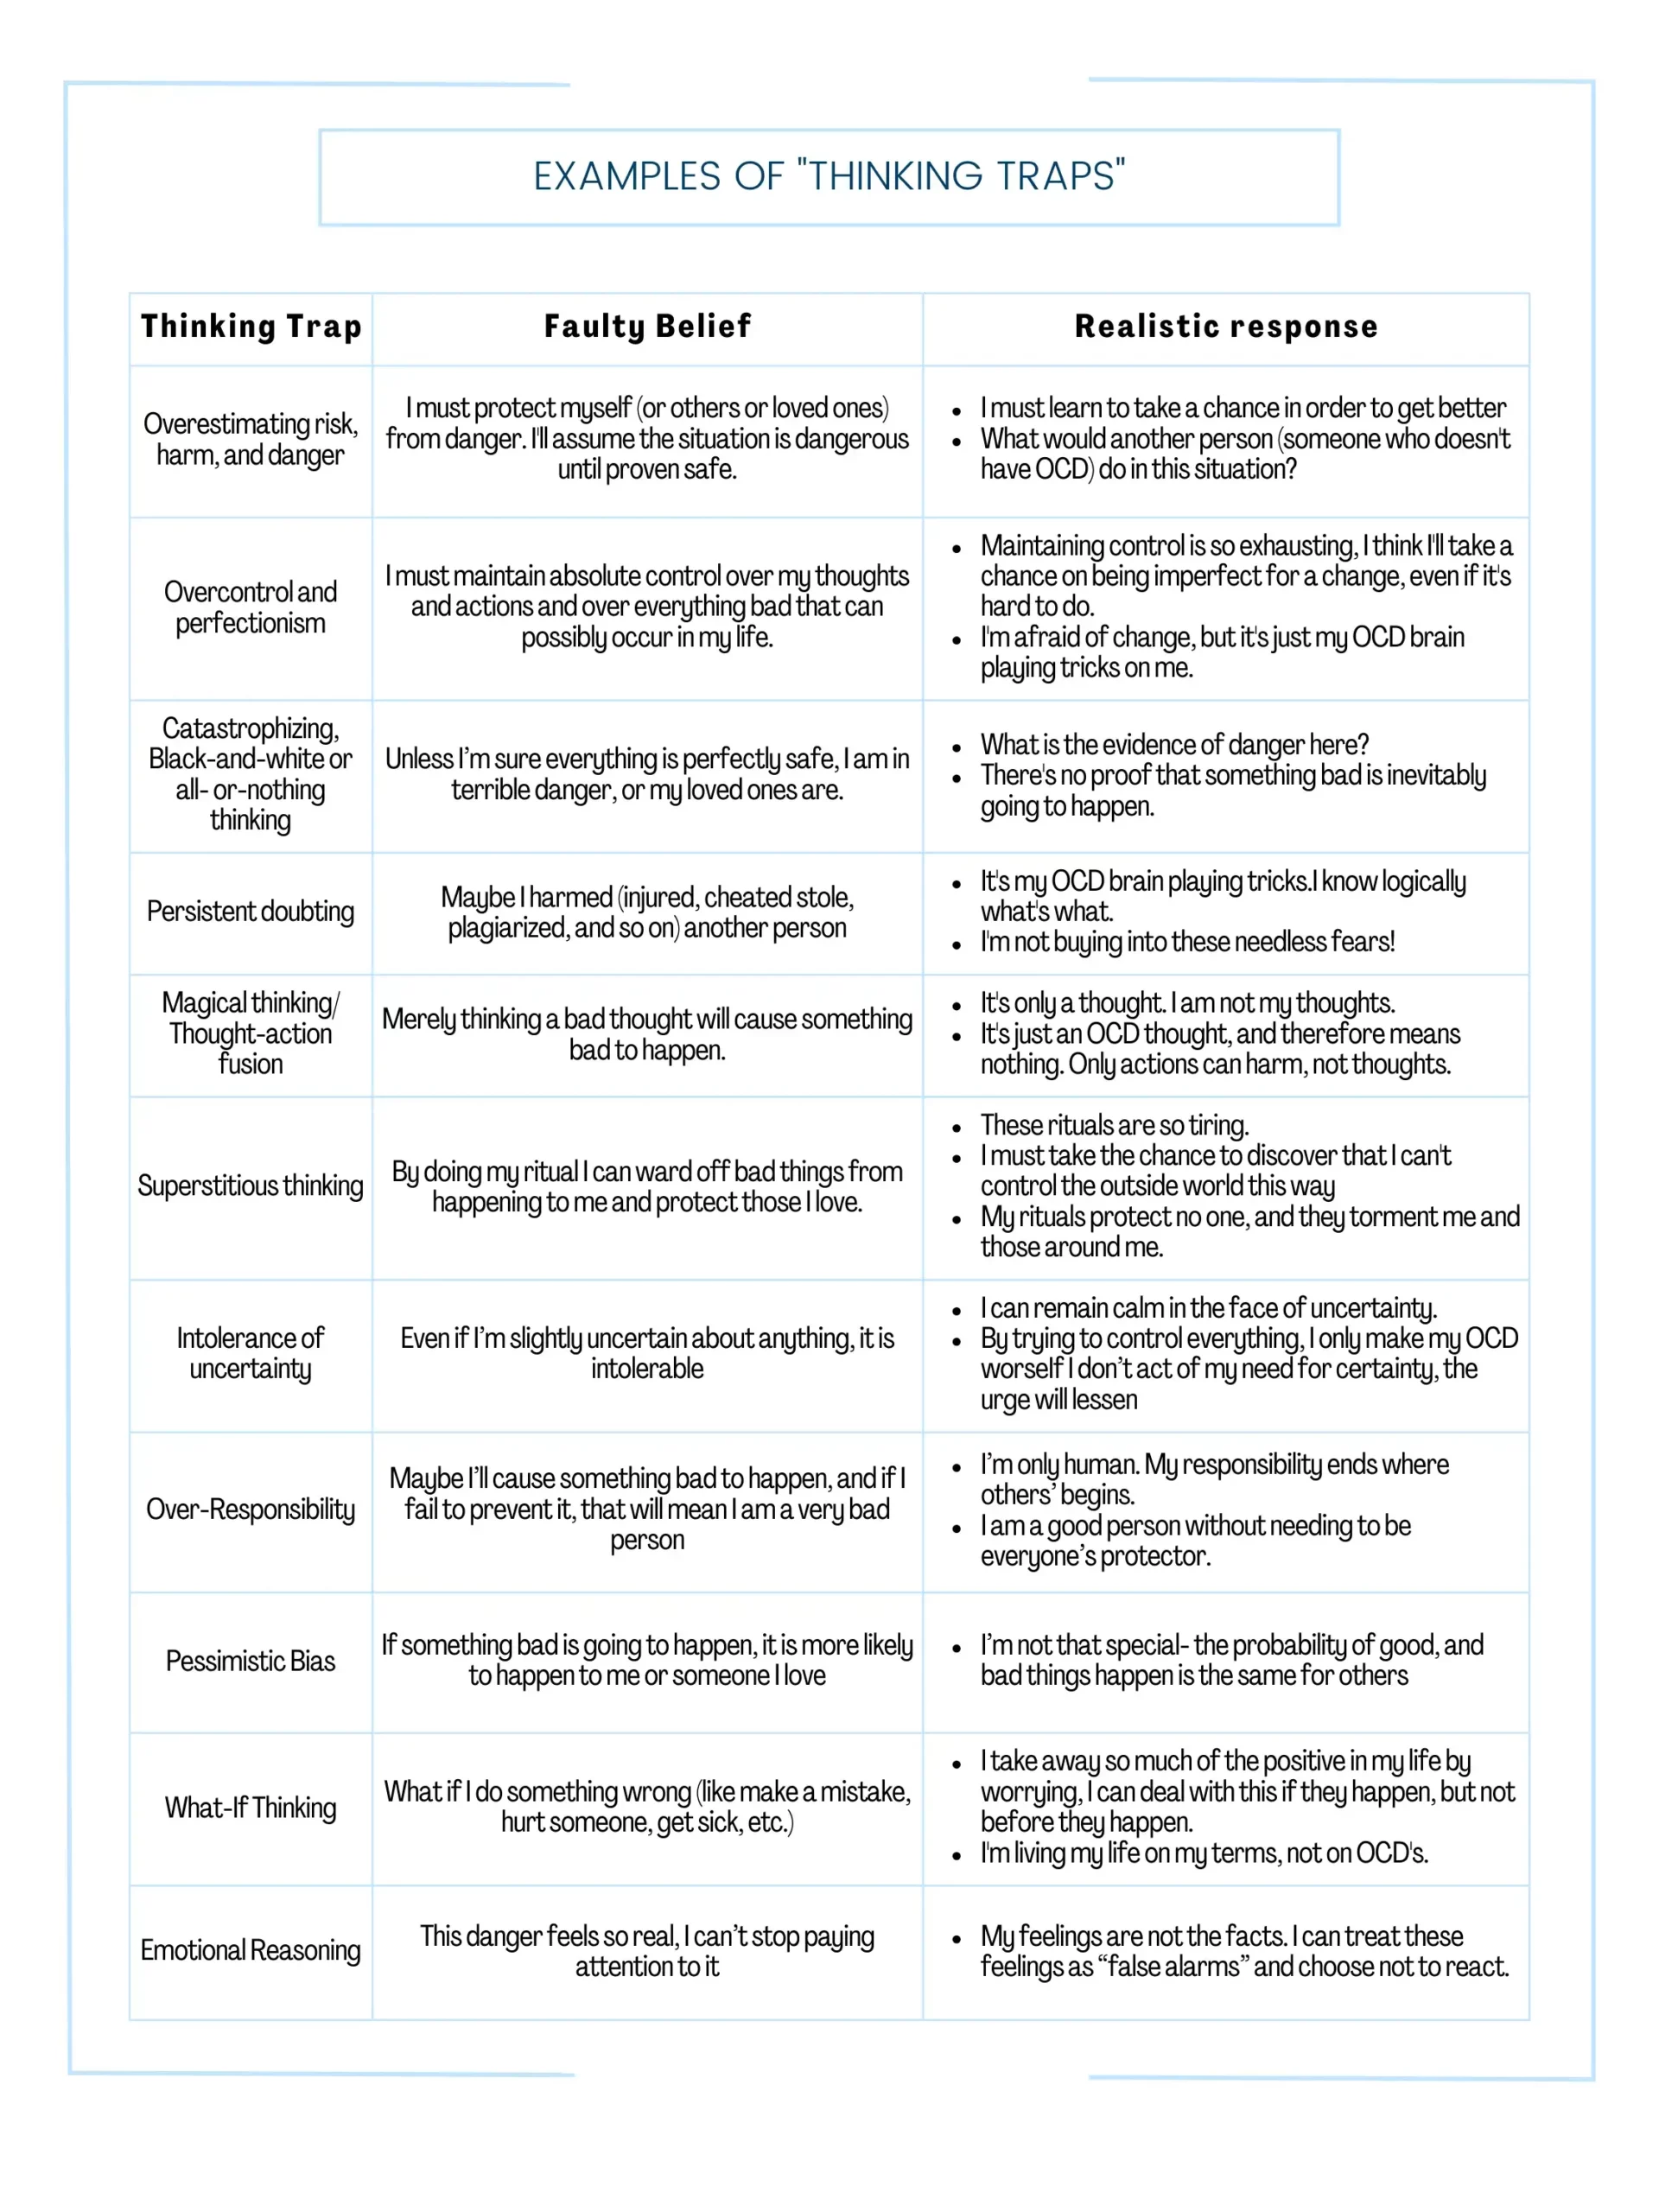 Therapy Worksheet: Thinking traps CBT worksheet